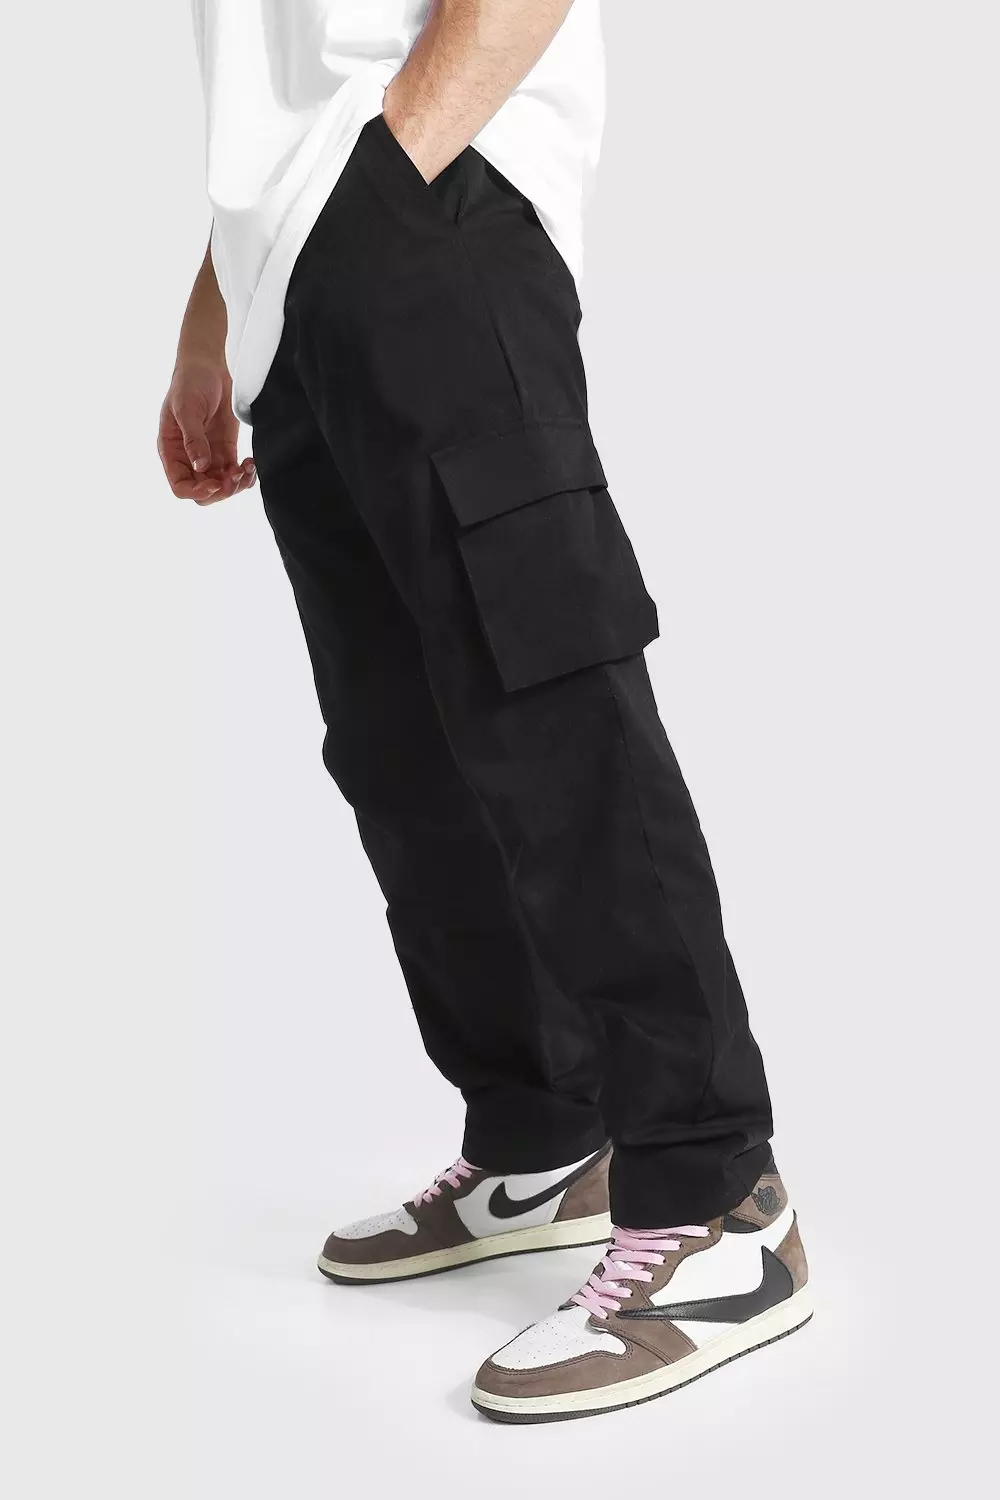 boohooMAN Men's Tall Fixed Relaxed Fit Cargo Pants